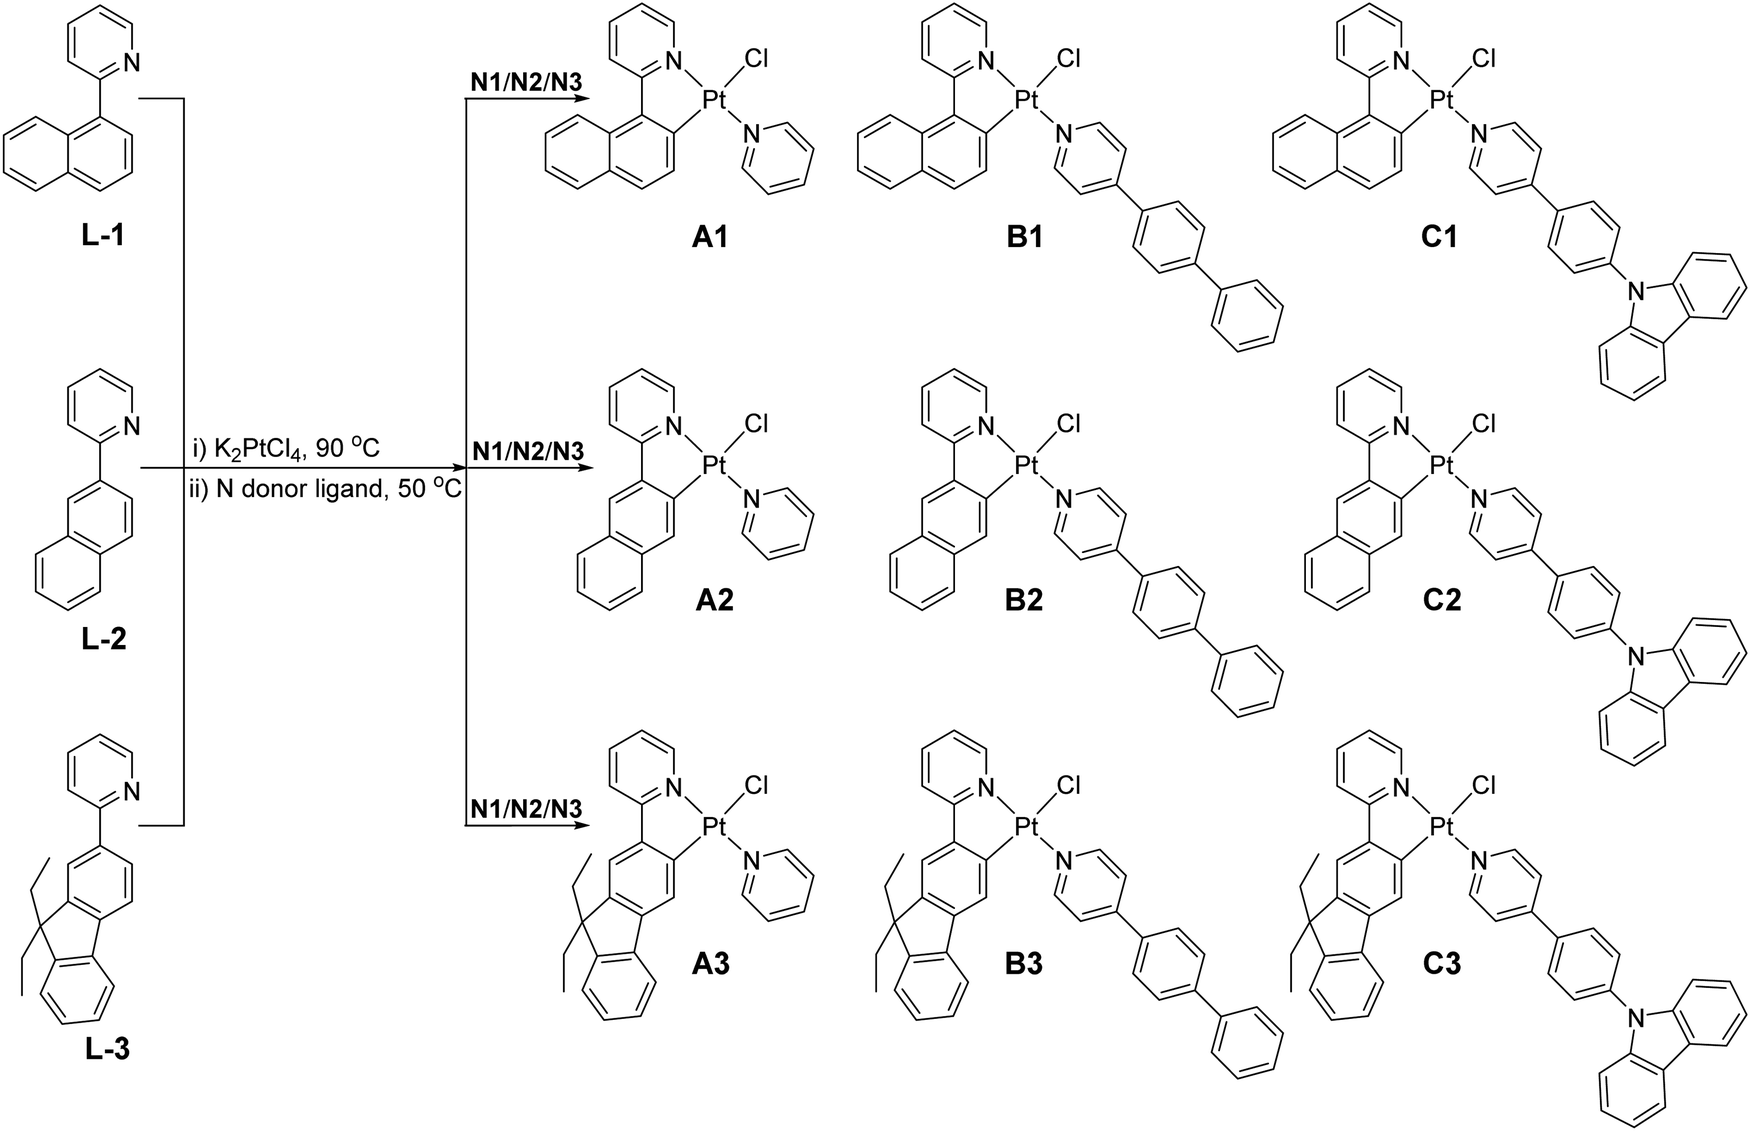 Aggregation Induced Phosphorescence Emission Aipe Behaviors In Ptii C N N Donor Ligand Cl Type Complexes Through Restrained D2d Deformation Of The Coordinating Skeleton And Their Optoelectronic Properties Journal Of Materials Chemistry C Rsc